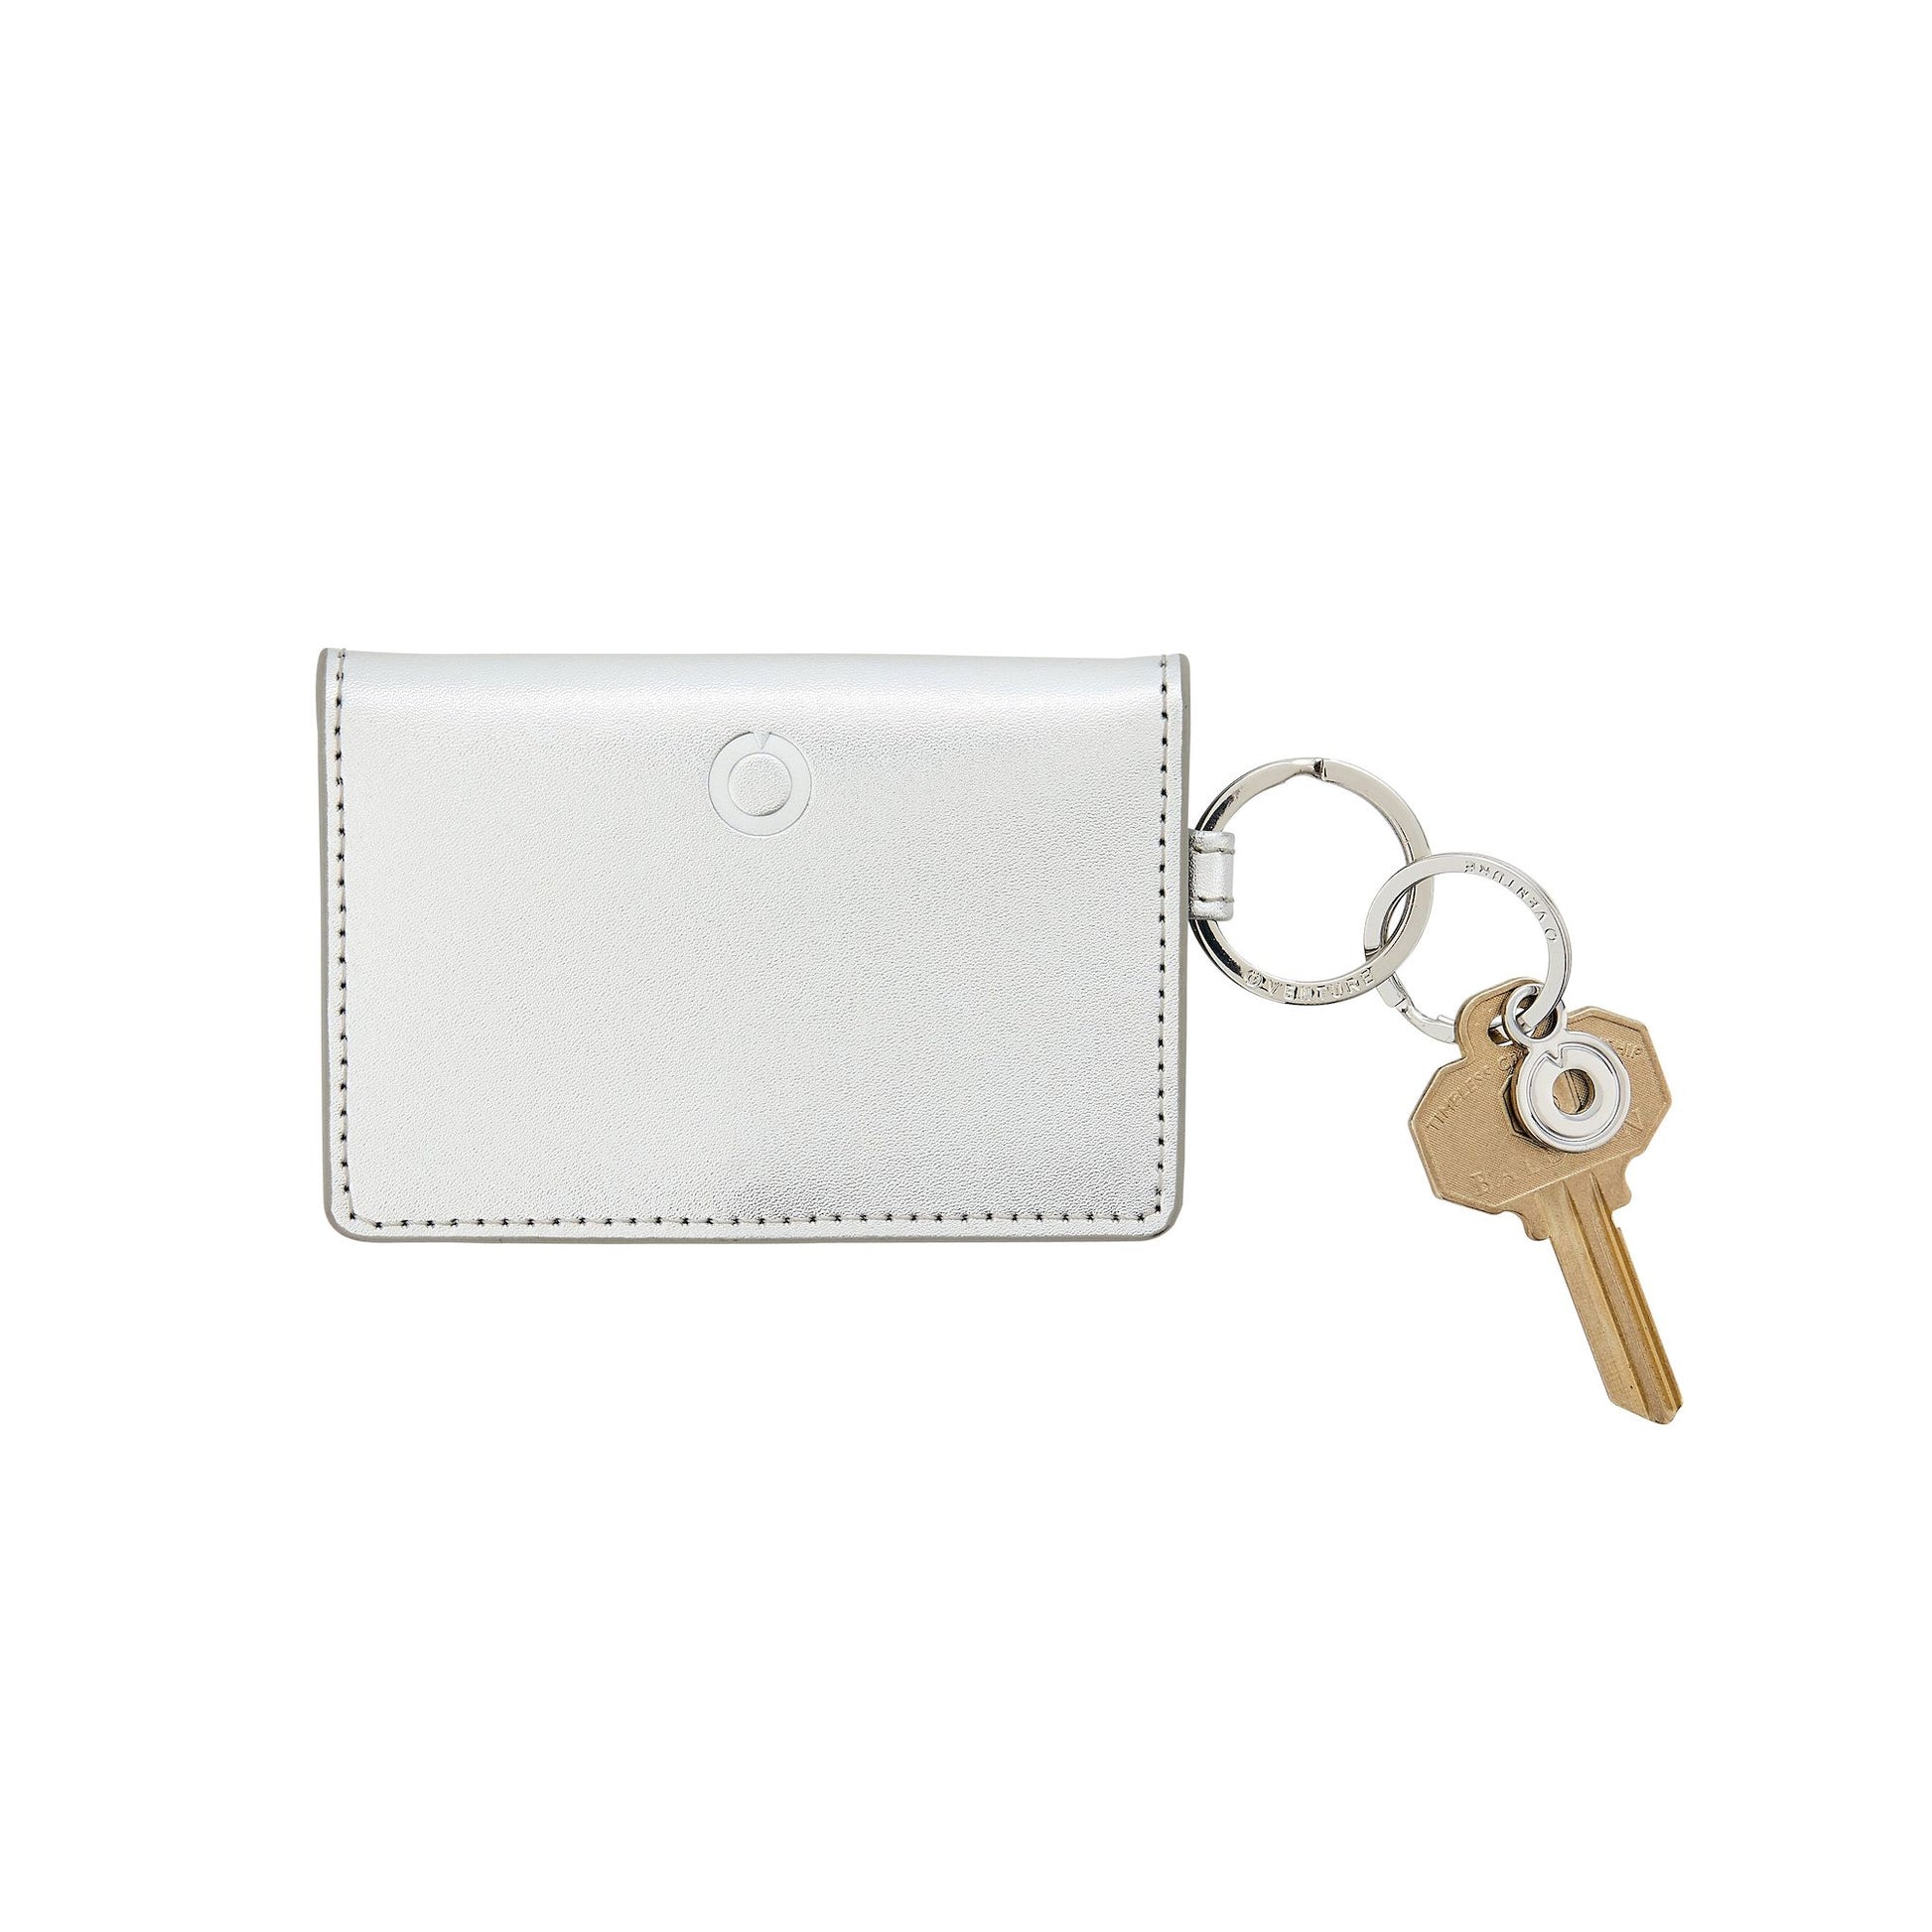 Silver leather id case with key attached